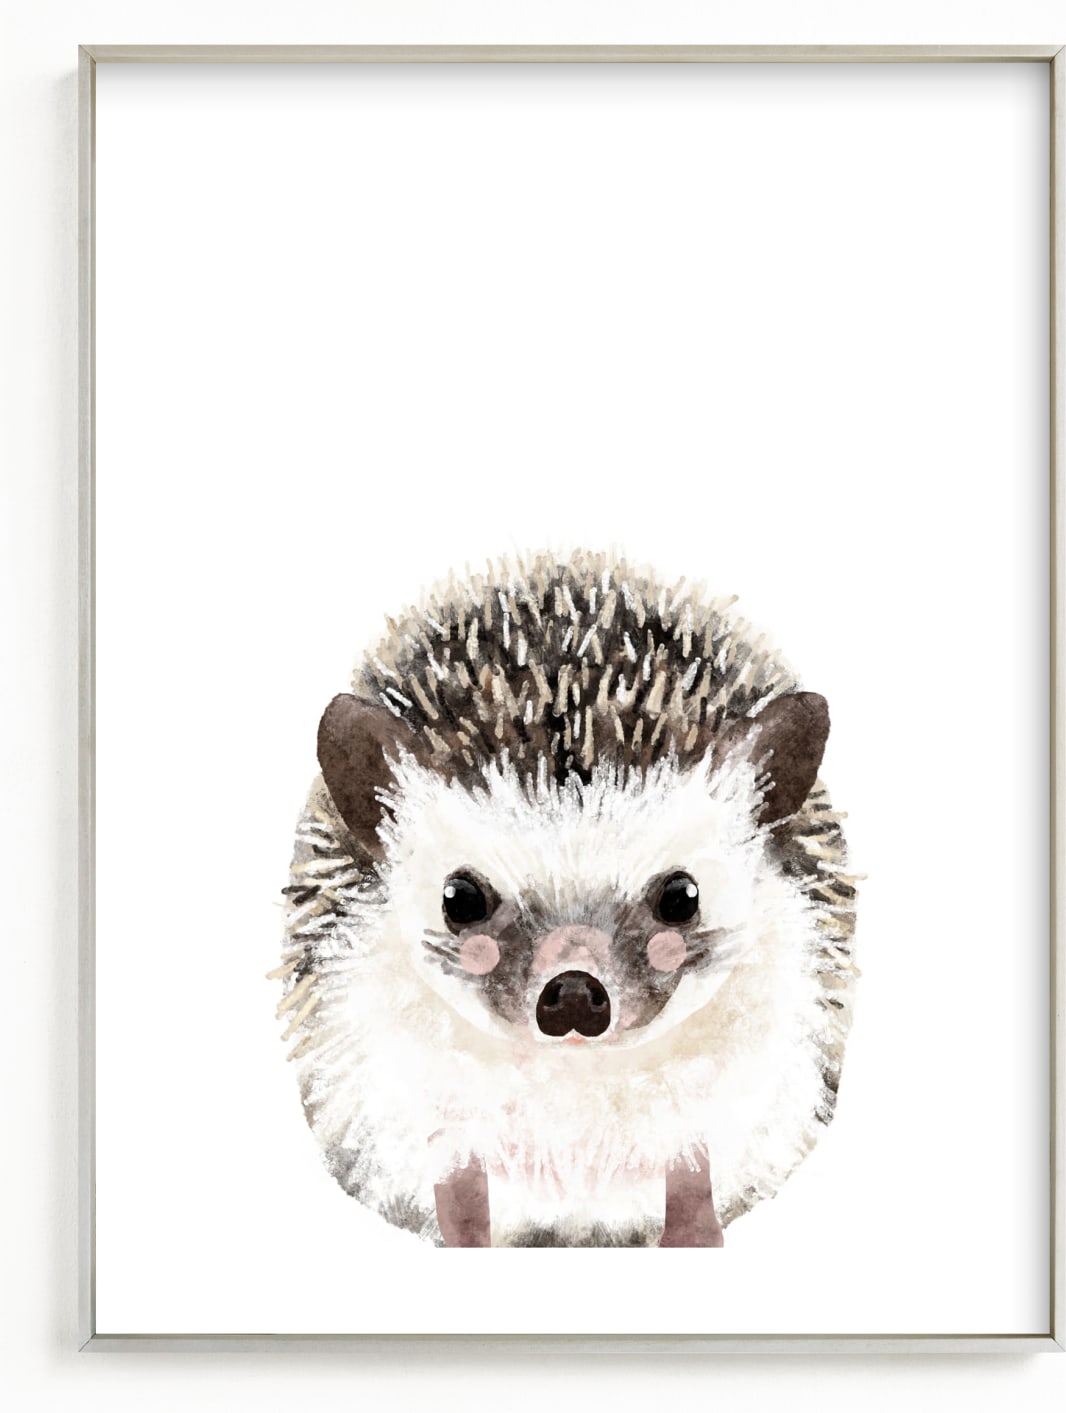 This is a brown art by Cass Loh called Baby Hedgehog.